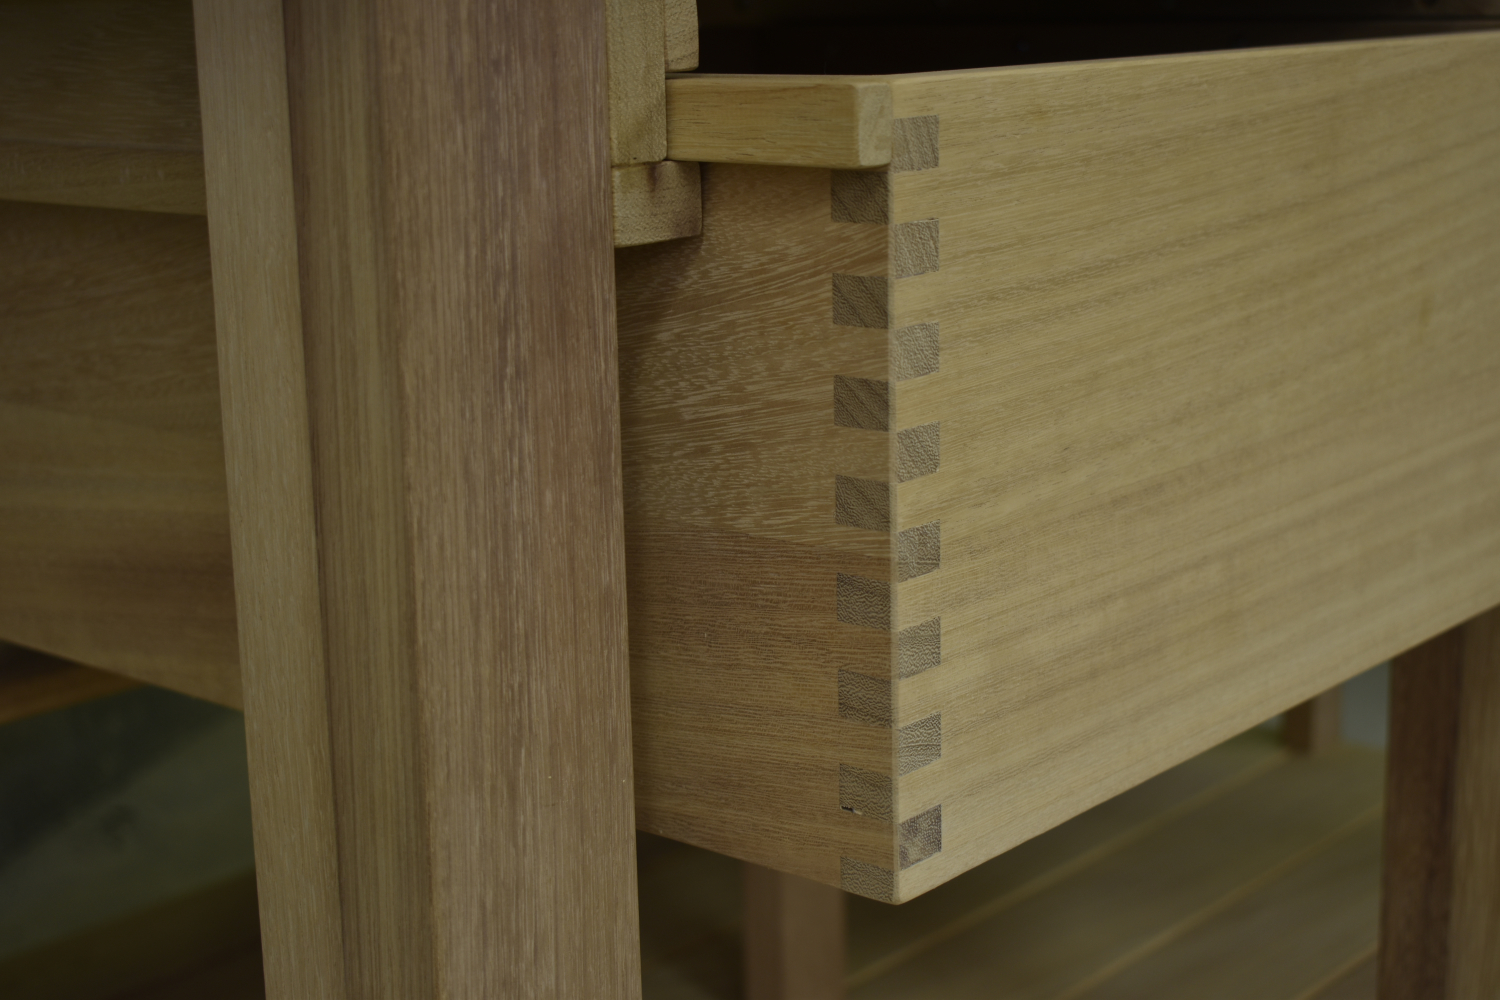 Finger jointed drawer boxes